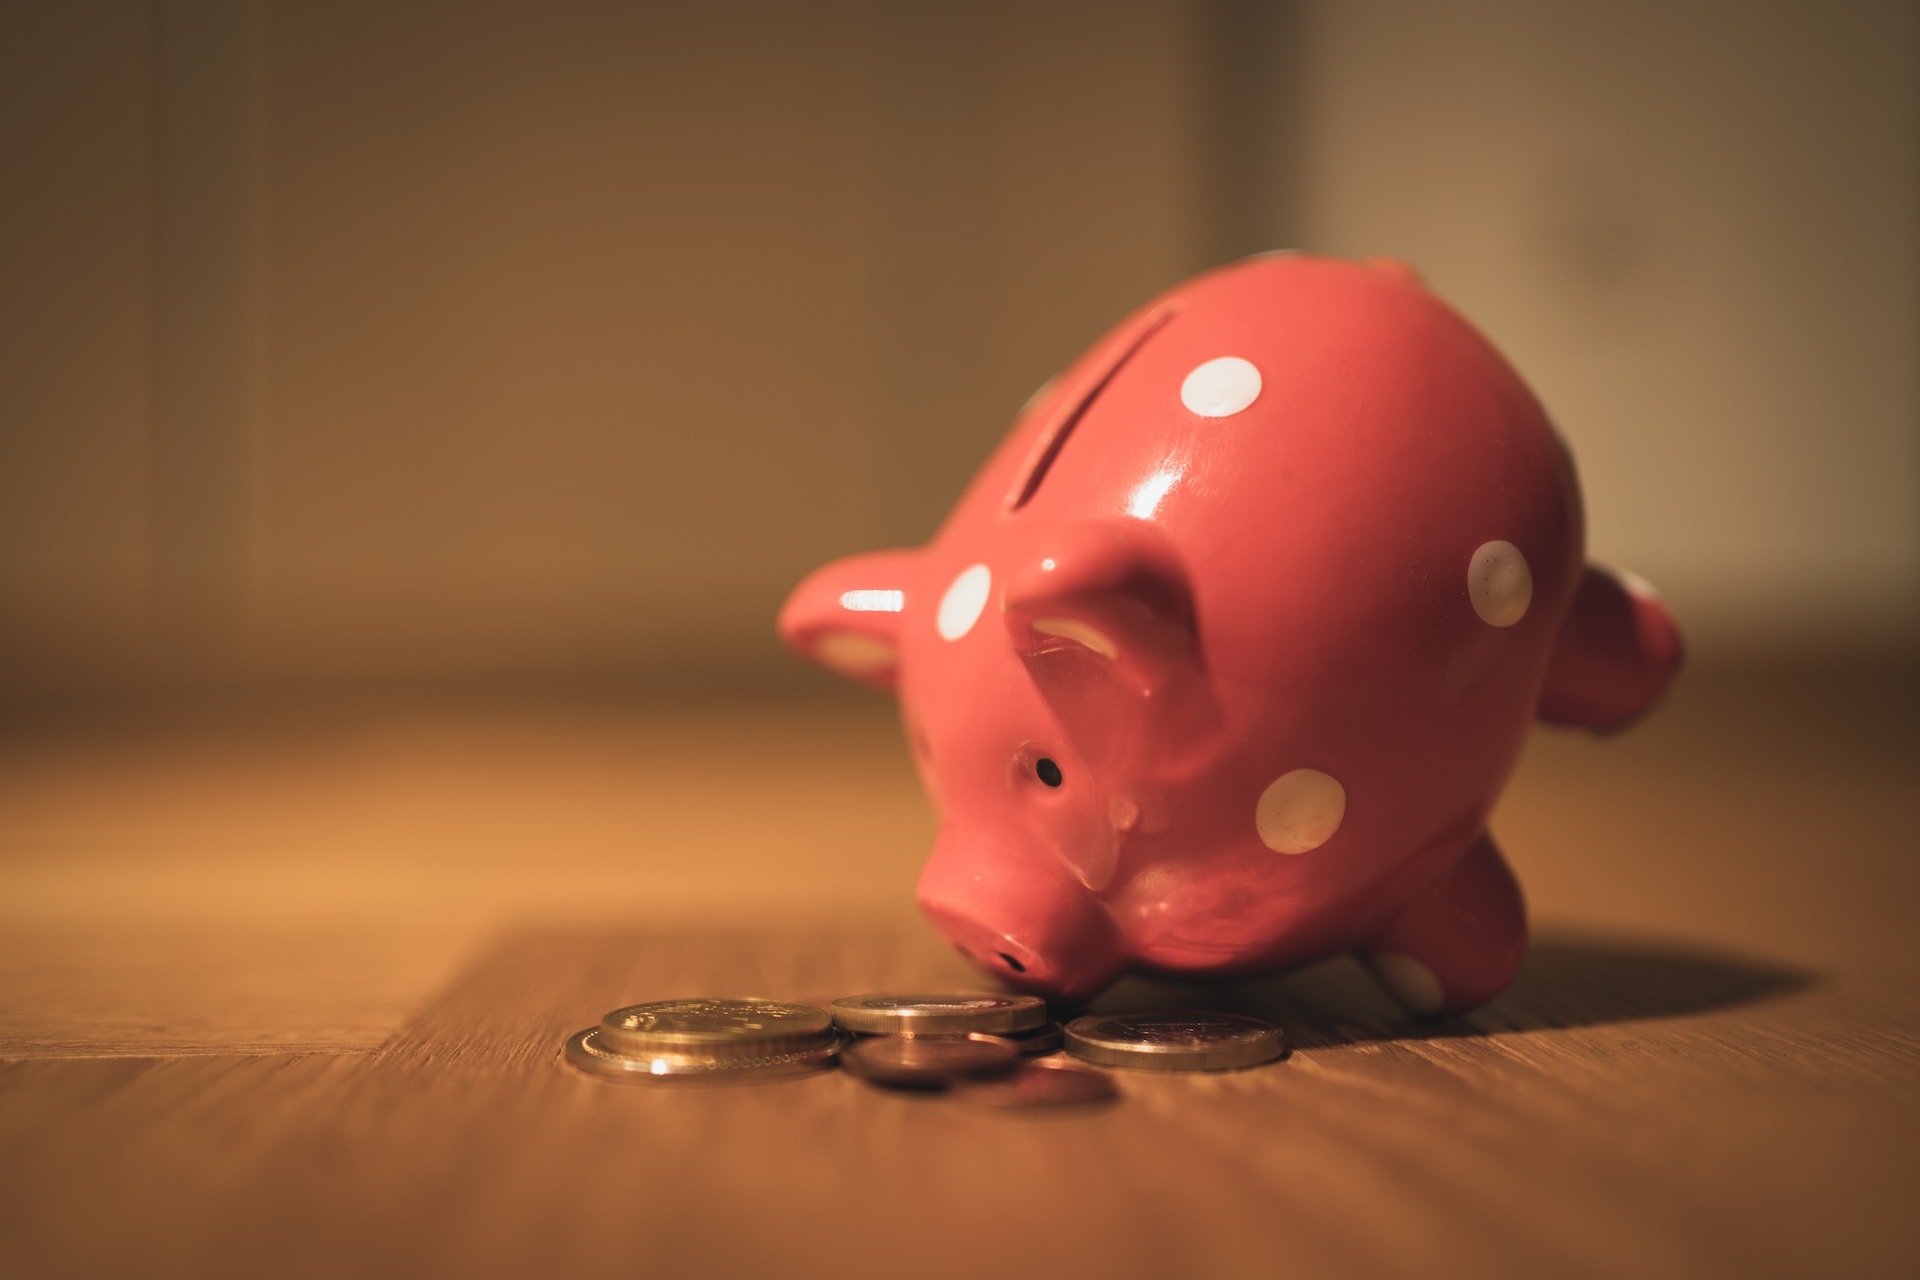 Pink piggy bank and coins